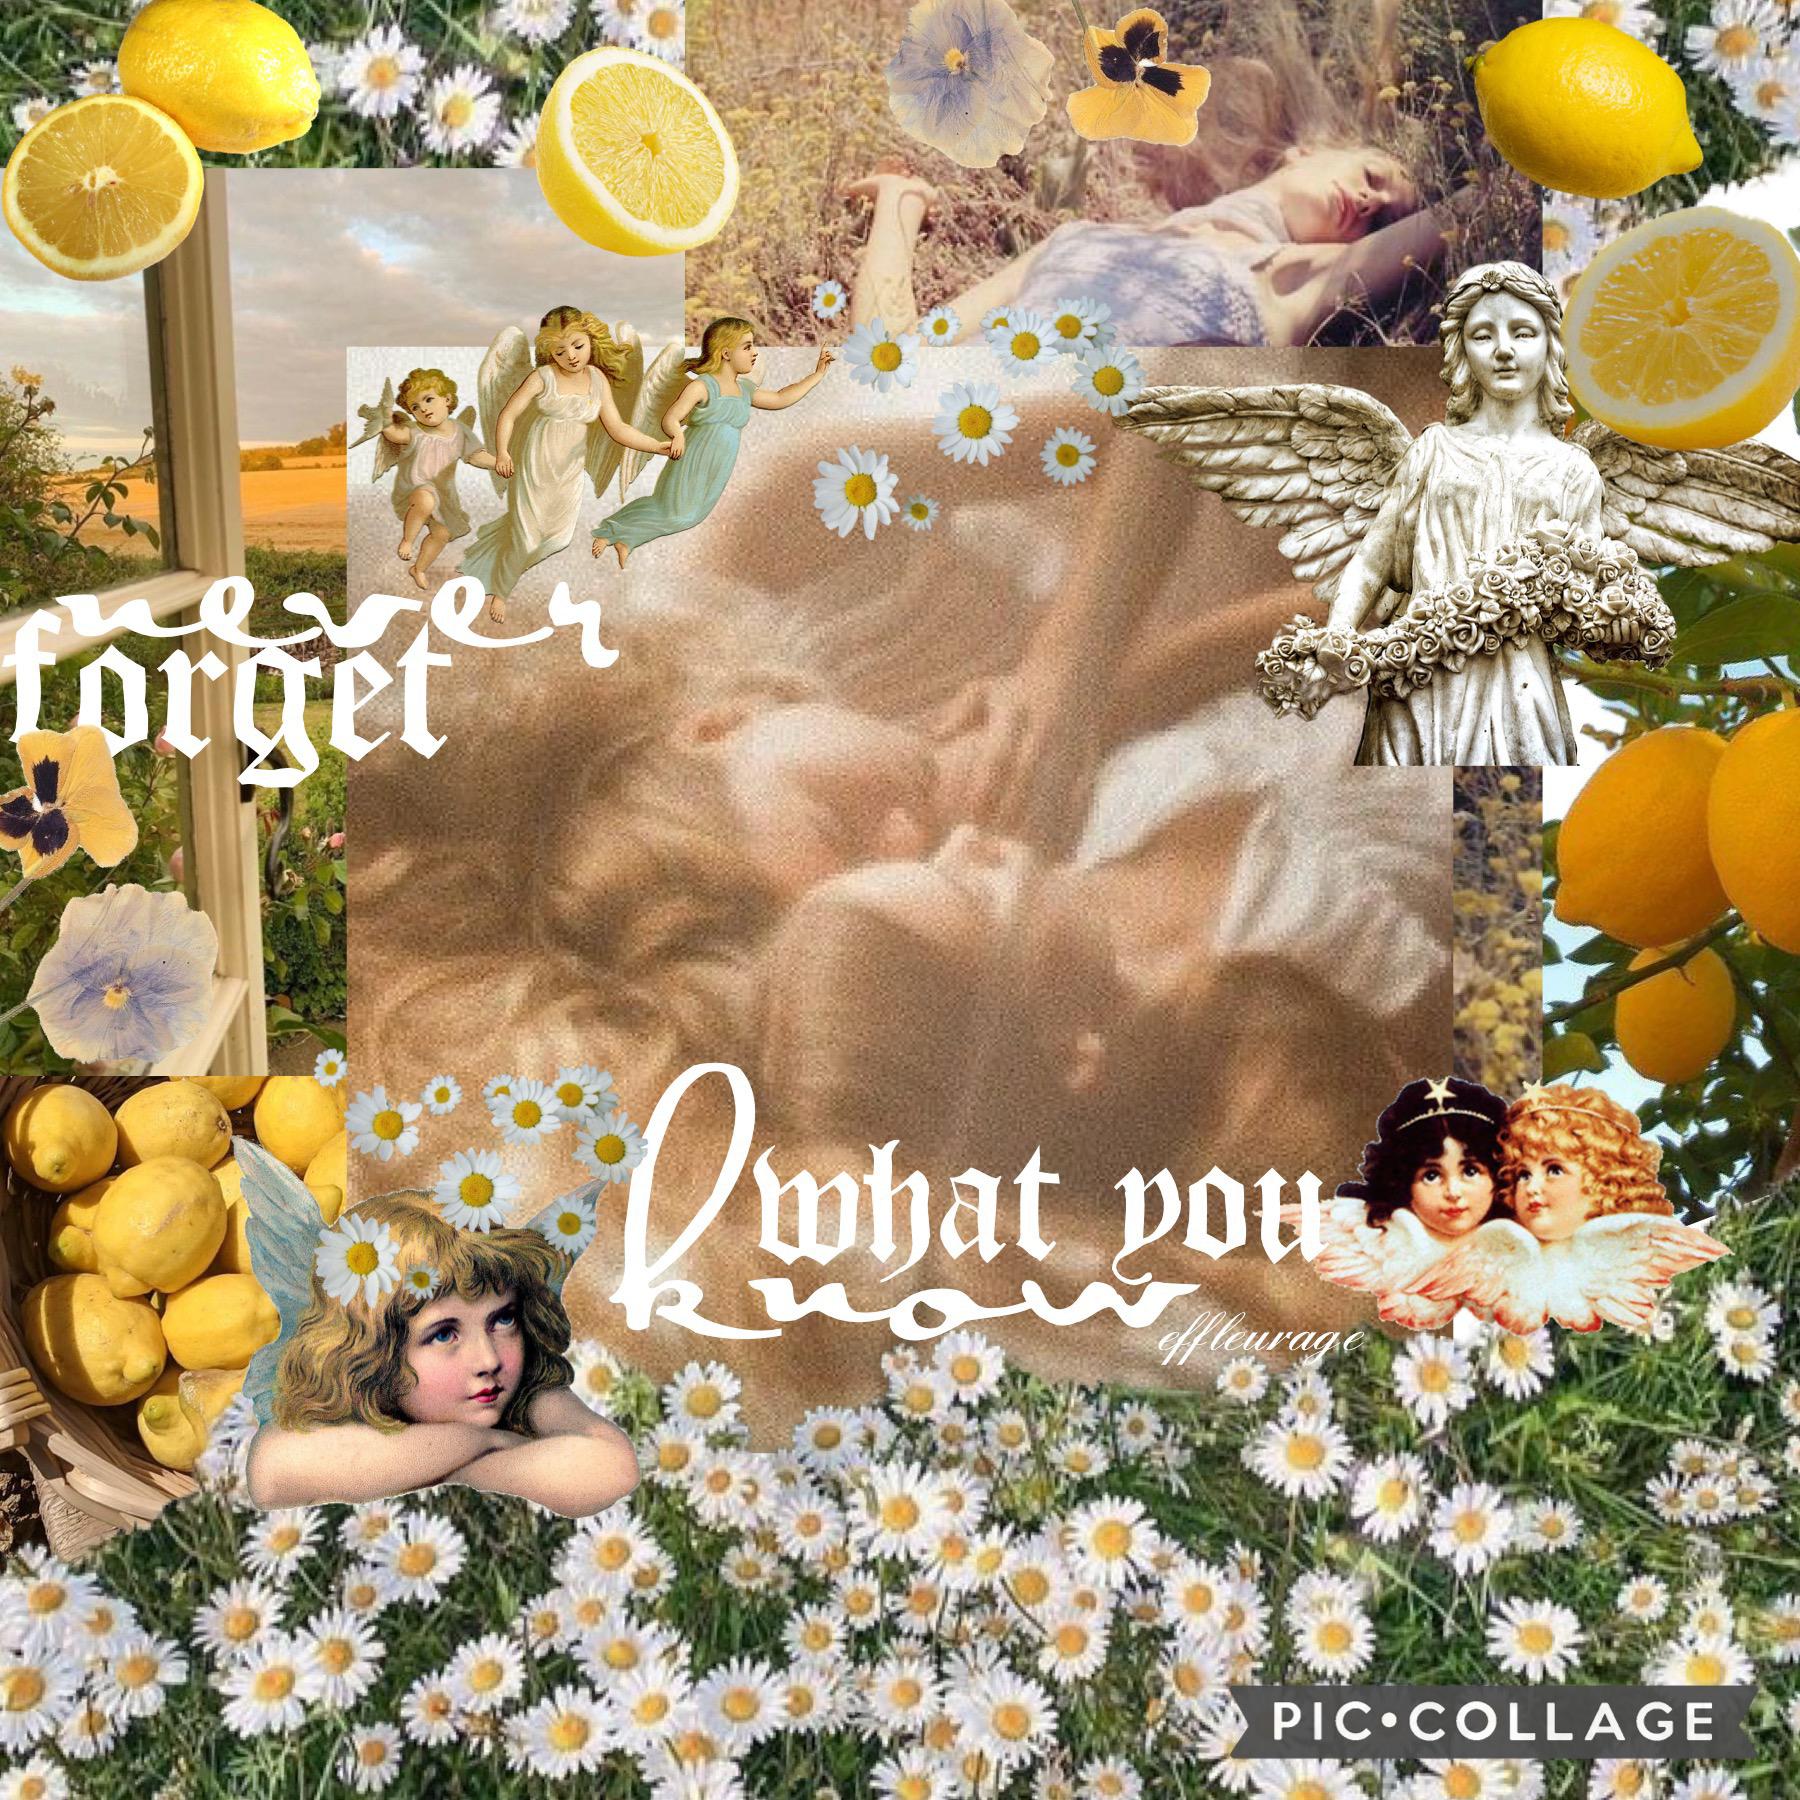 🍋tap🍋

i really like thisss! once again, this is inspired by multiple people so irdk who to credit bc i go and look at a bunch of collages not looking who made them and then like get ideas idk 🤷‍♀️ anyways, i hope you have a good rest of your day/evening/